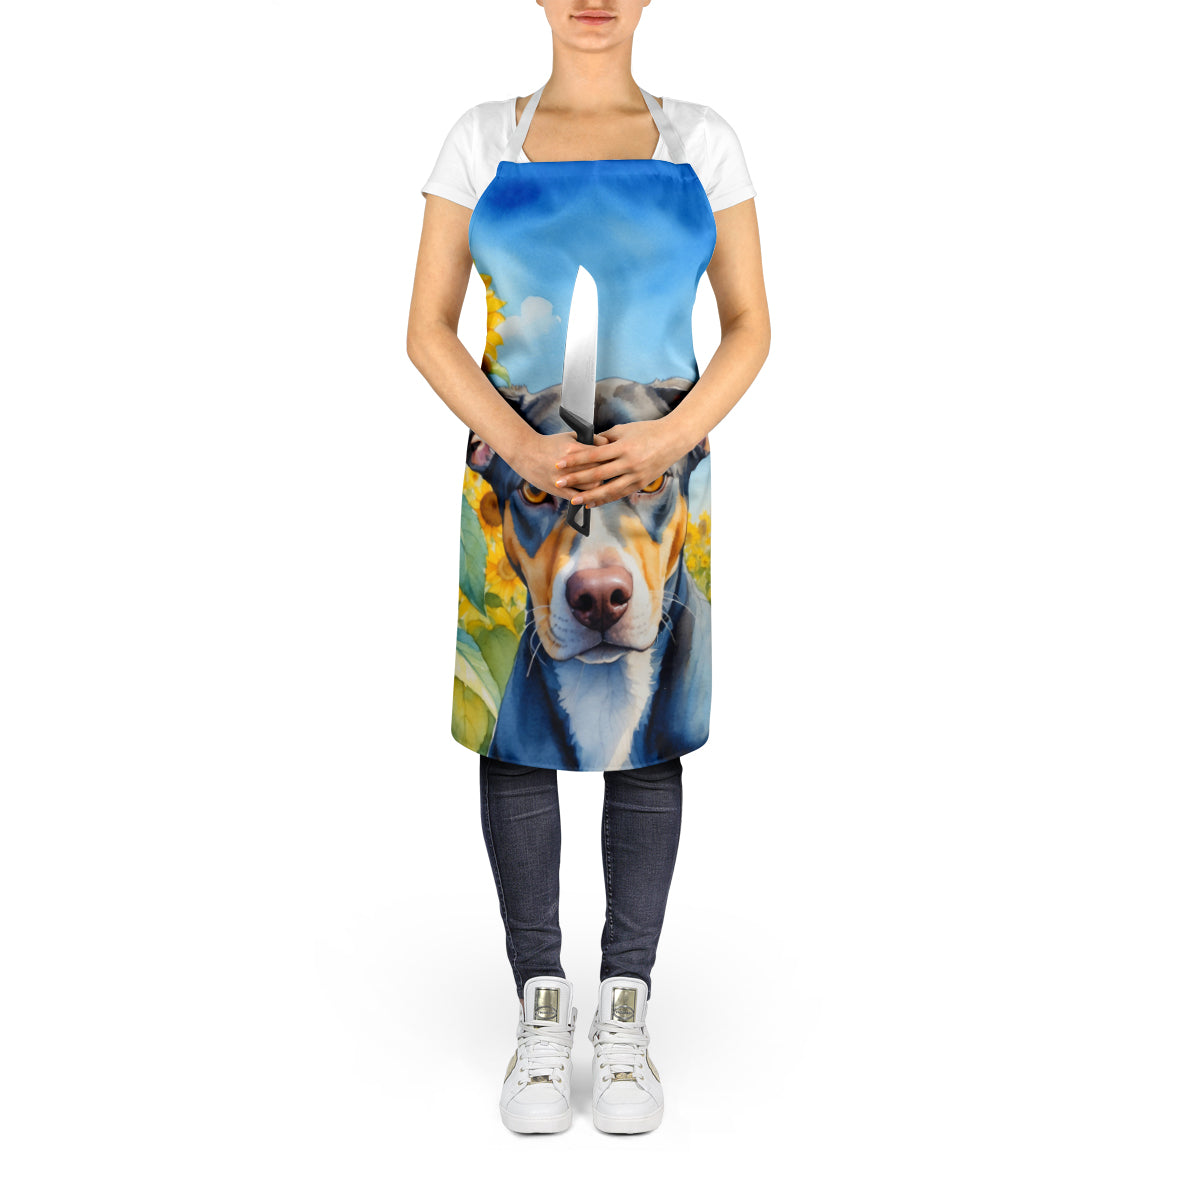 Catahoula in Sunflowers Apron